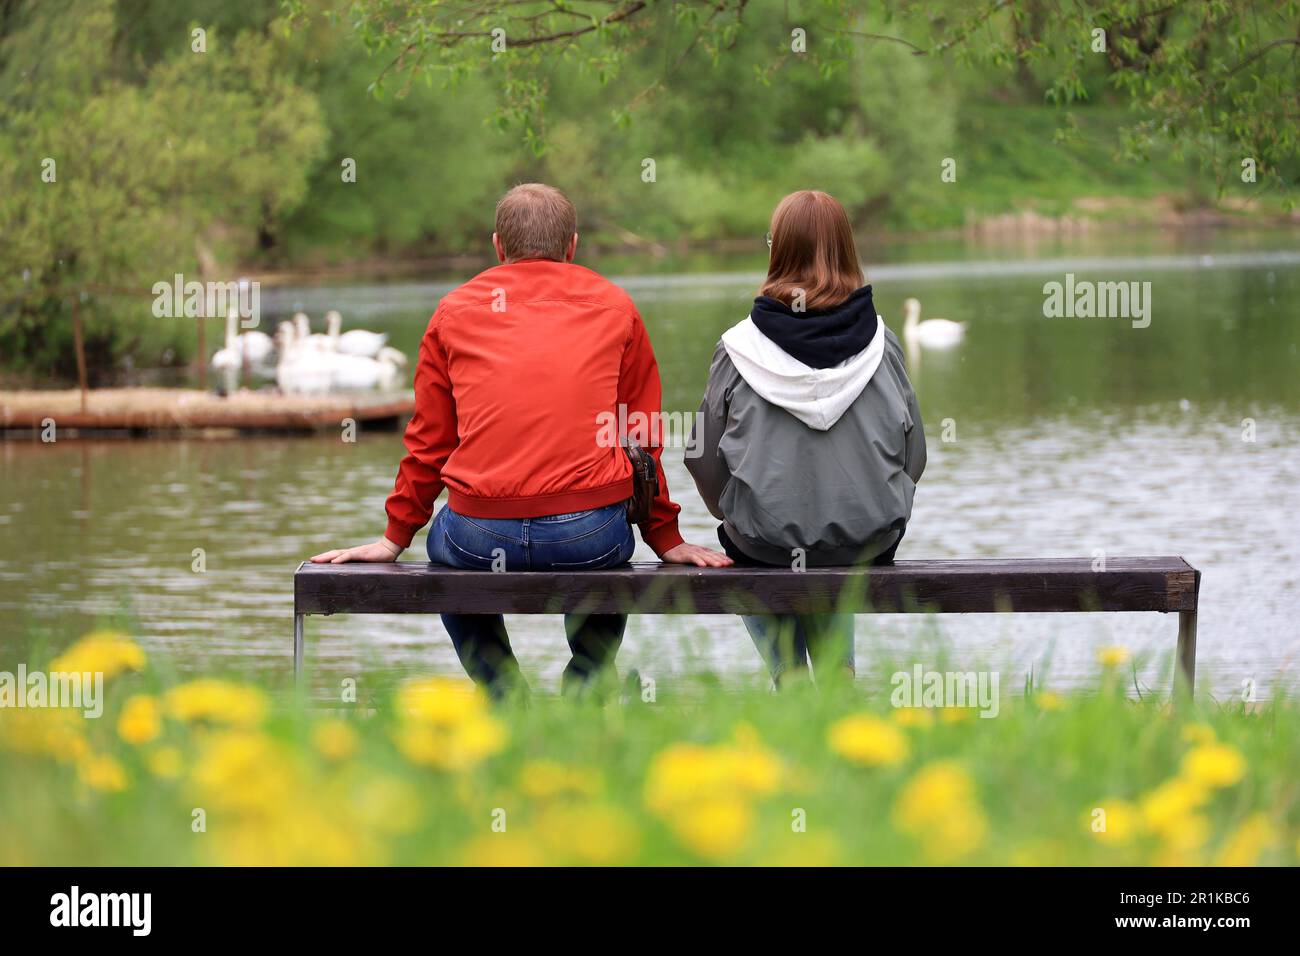 Couple sitting on a bench in spring park, view through dandelion flowers. Man and woman looking at white swans swimming in a lake Stock Photo